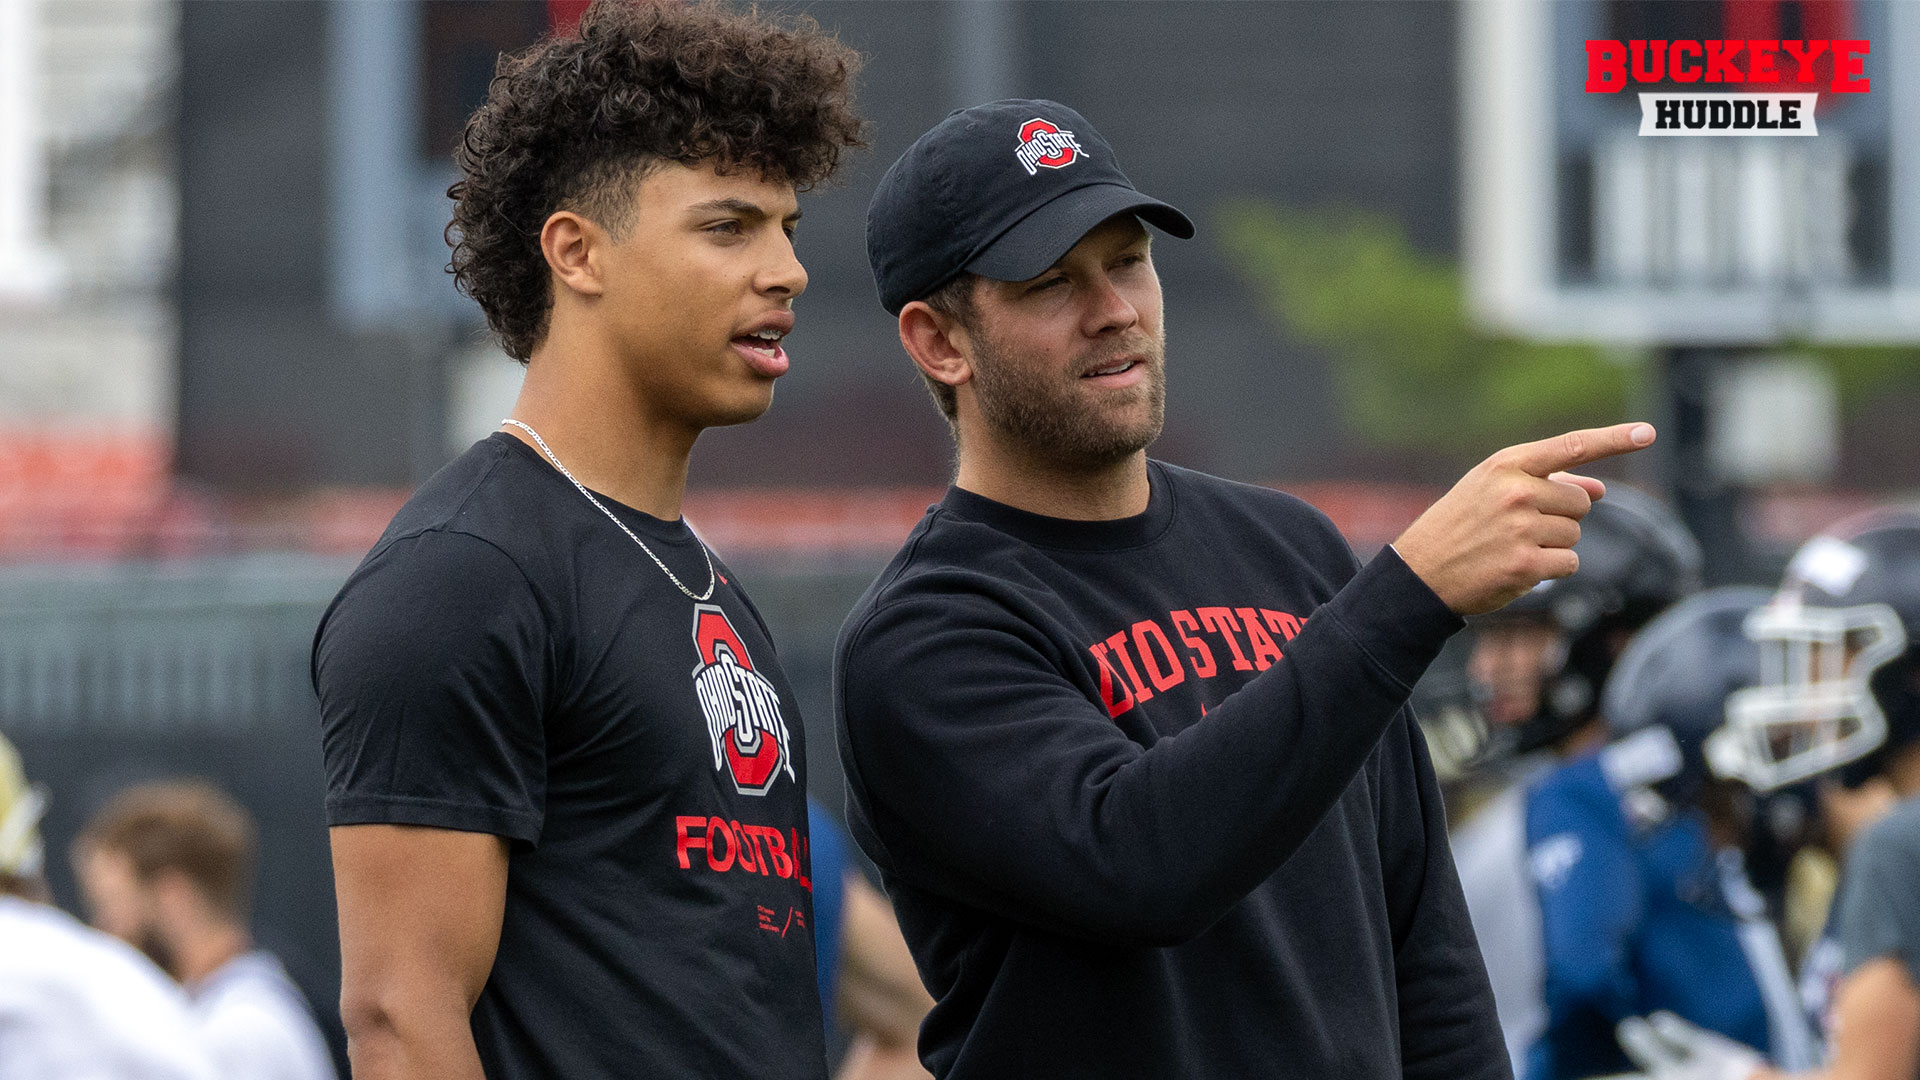 Committing To Ohio State Brings New Levels Of Attention, Different Pressures